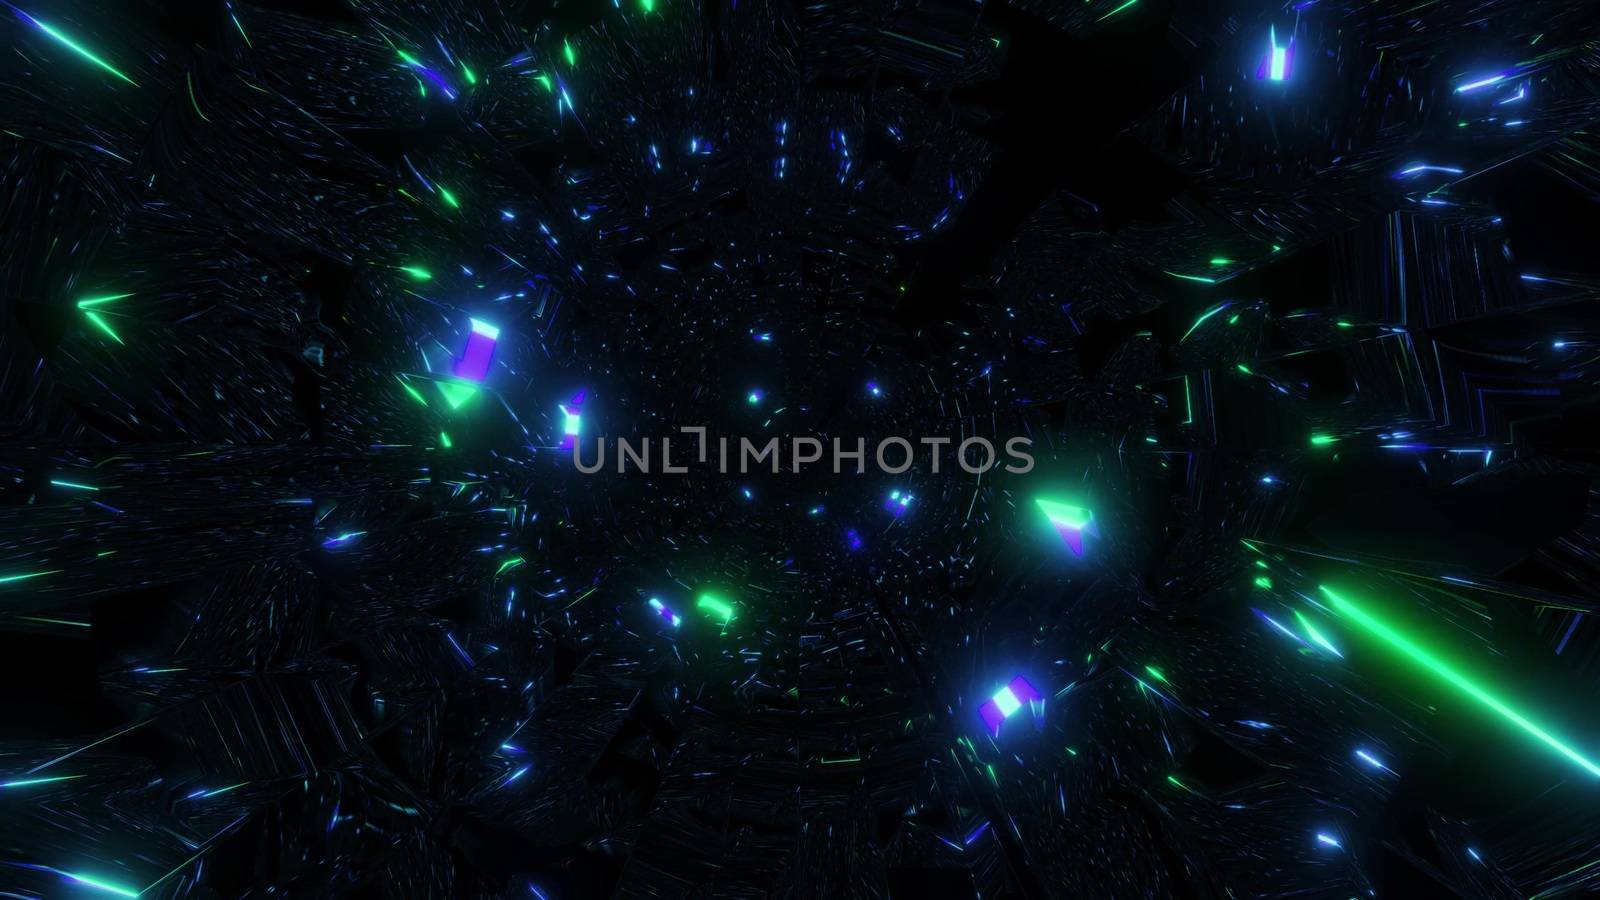 highly abstract green glowing design background wallpaper 3d illustration by tunnelmotions